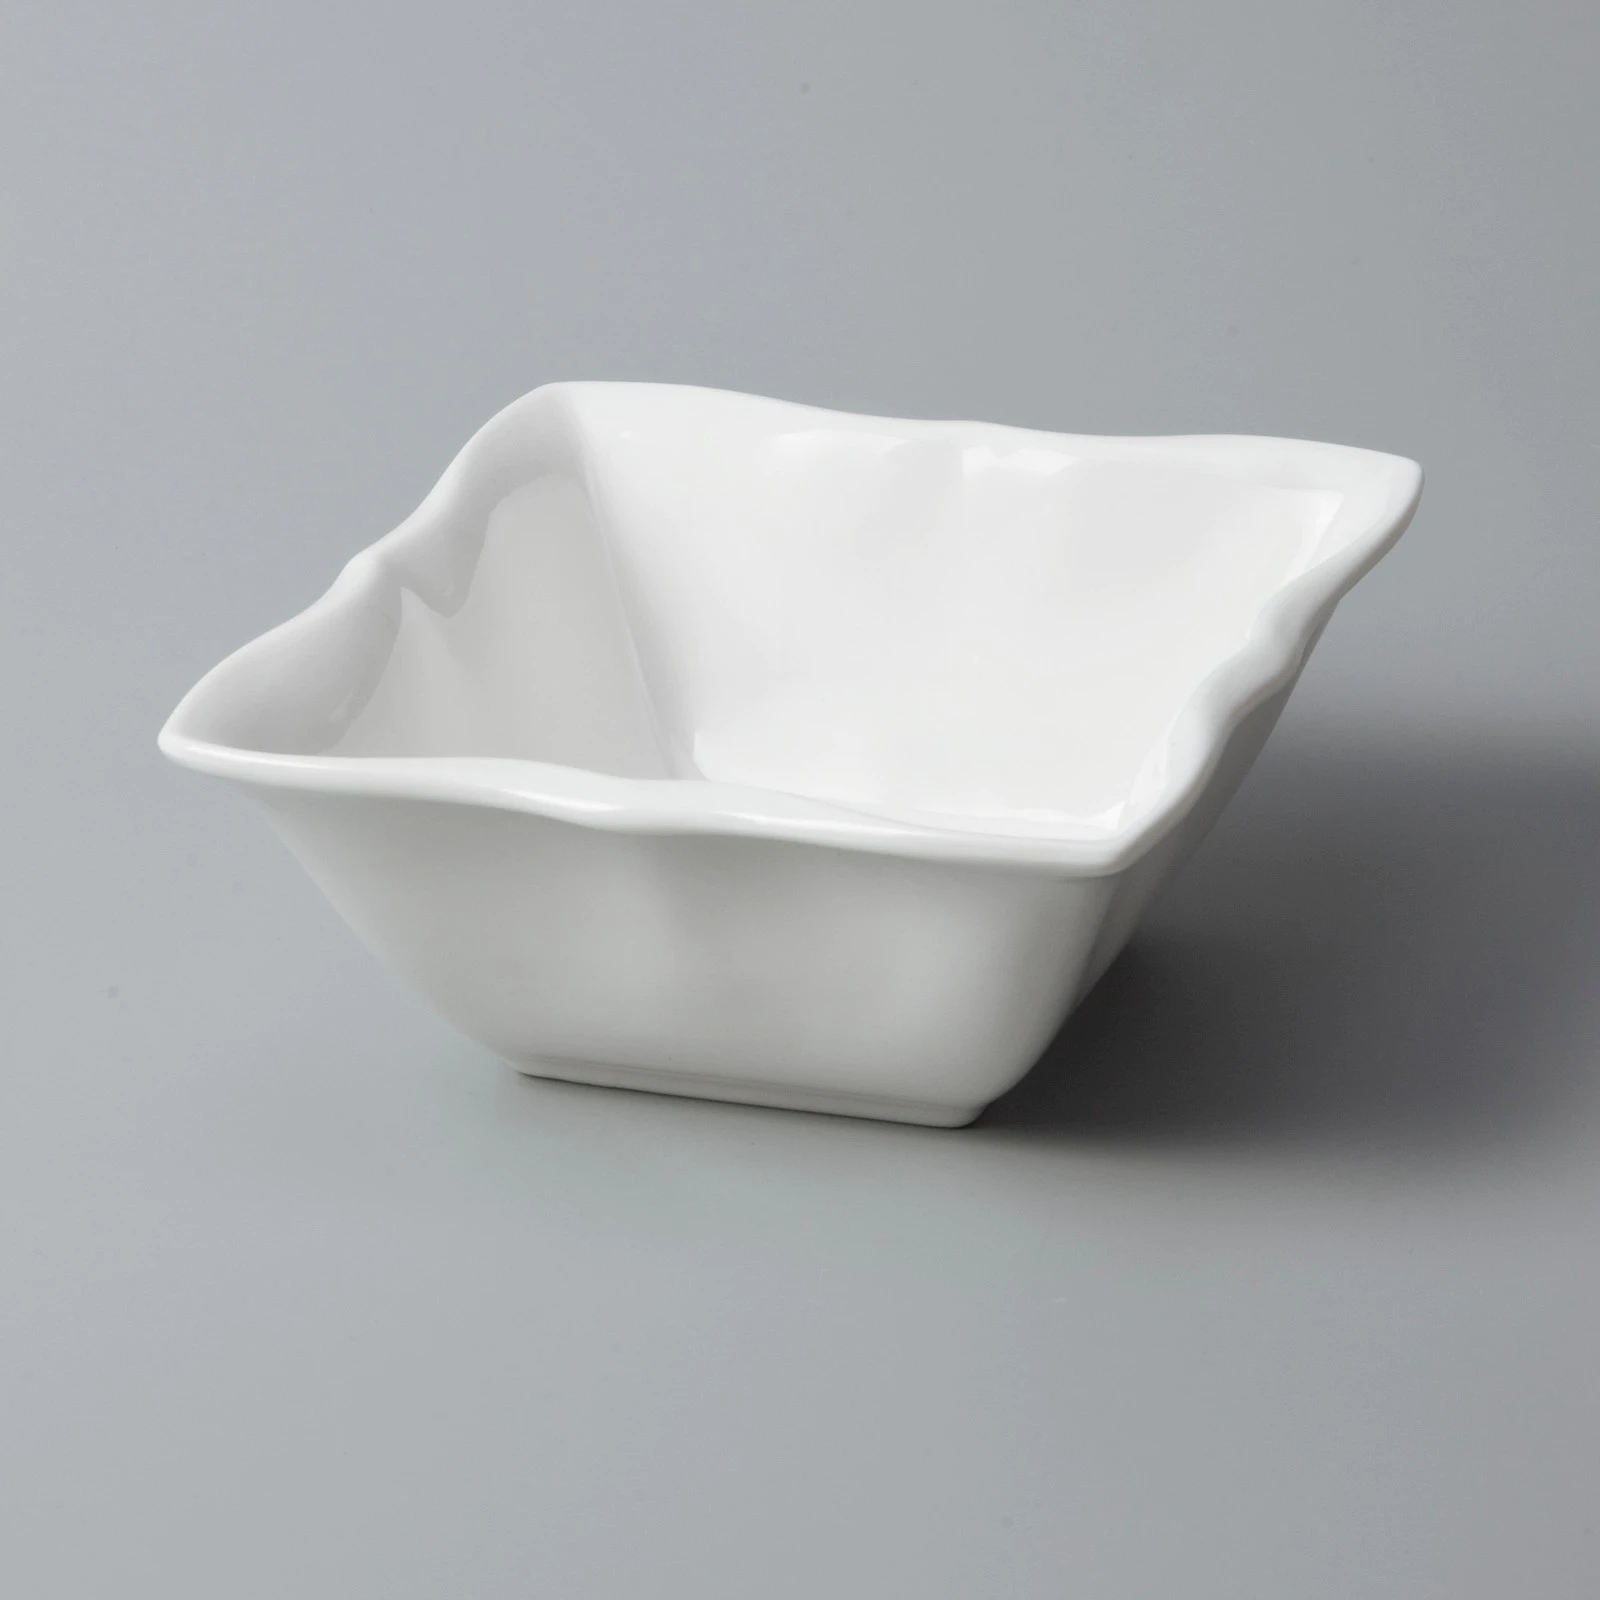 casual white porcelain tableware royalty Two Eight company